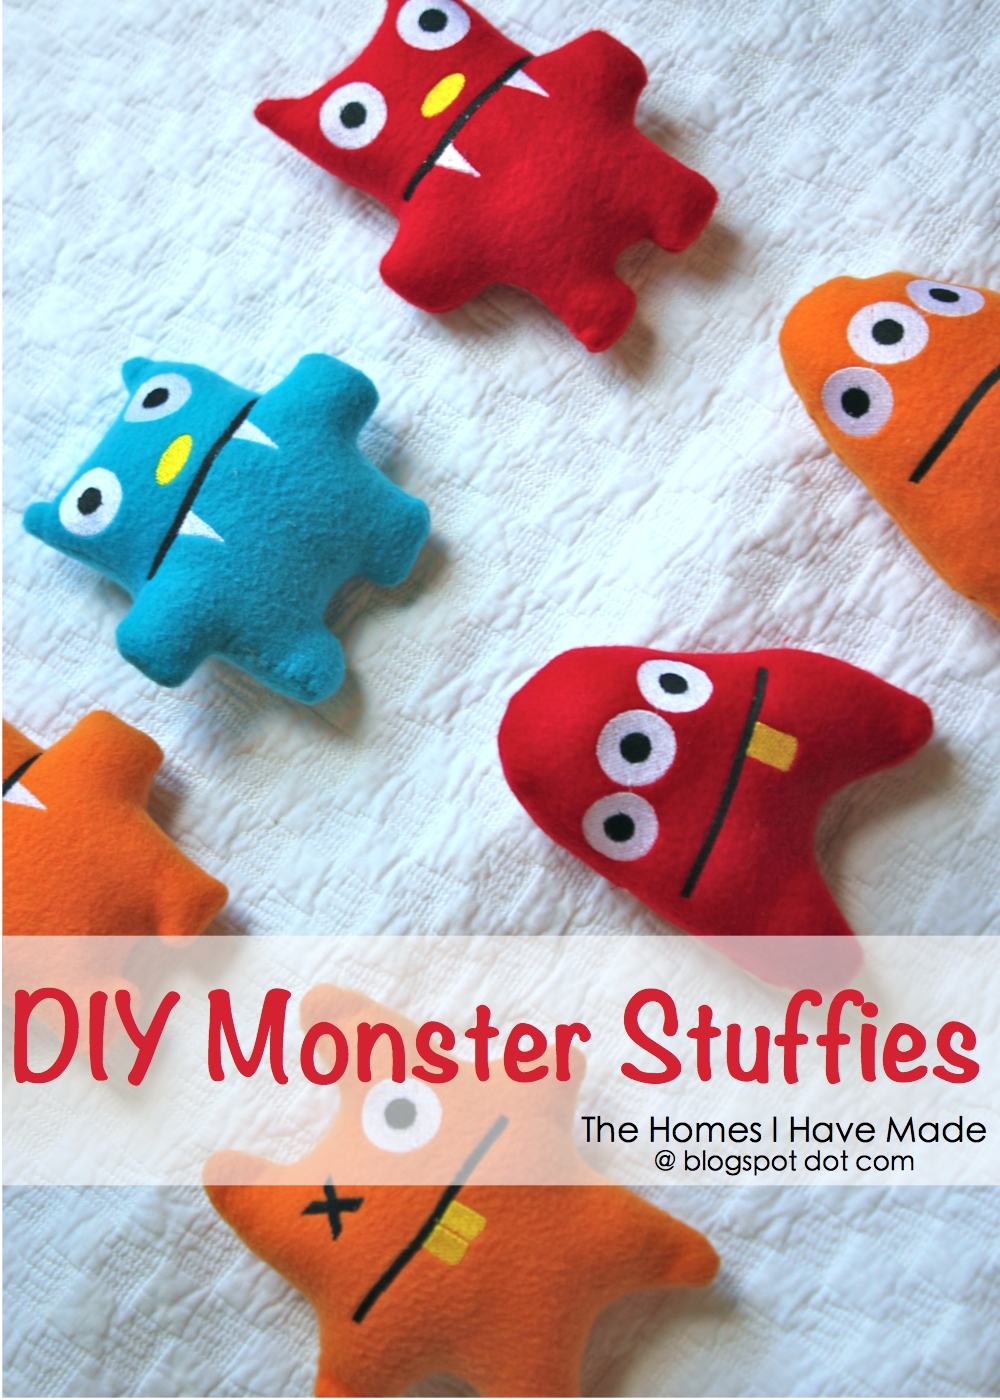 DIY Monster Stuffies! | The Homes I Have Made